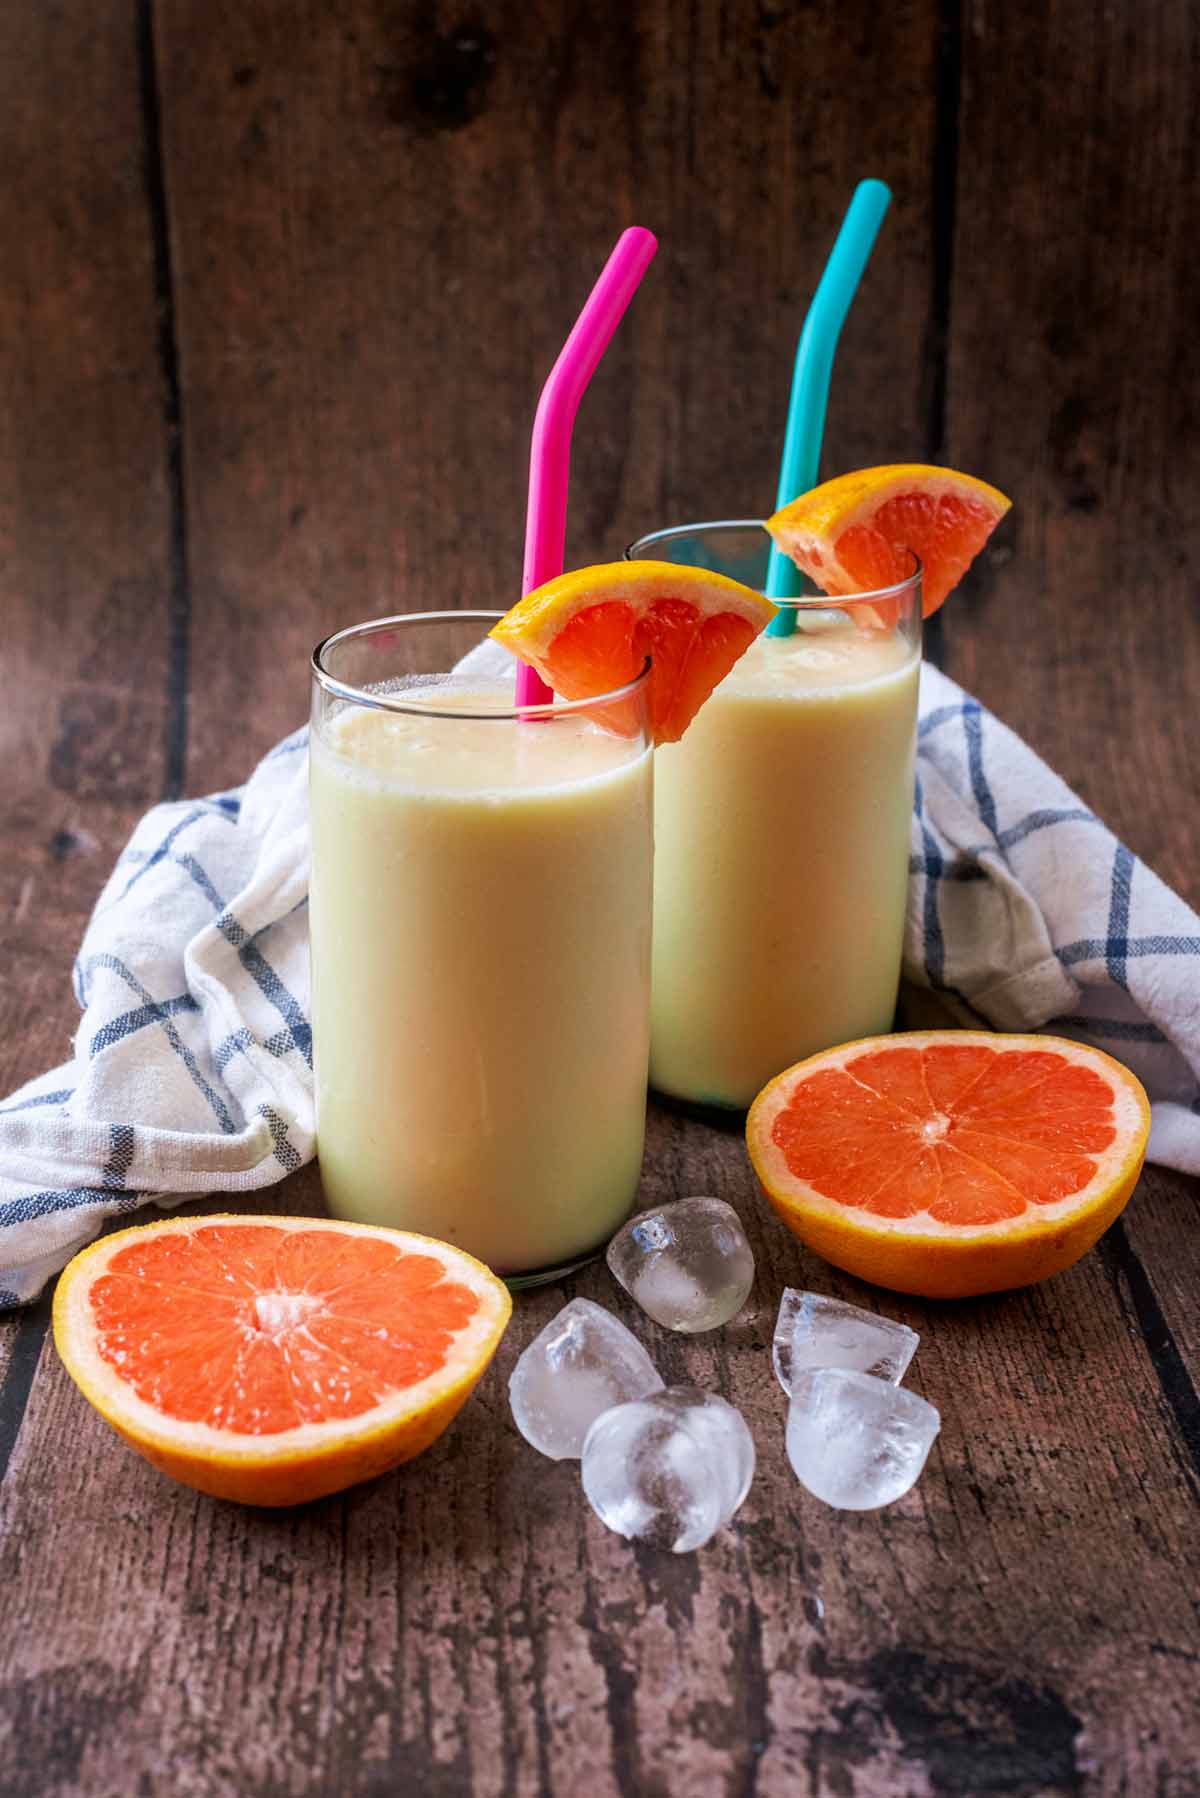 Two glasses of smoothie next to slices of grapefruit and some ice cubes.